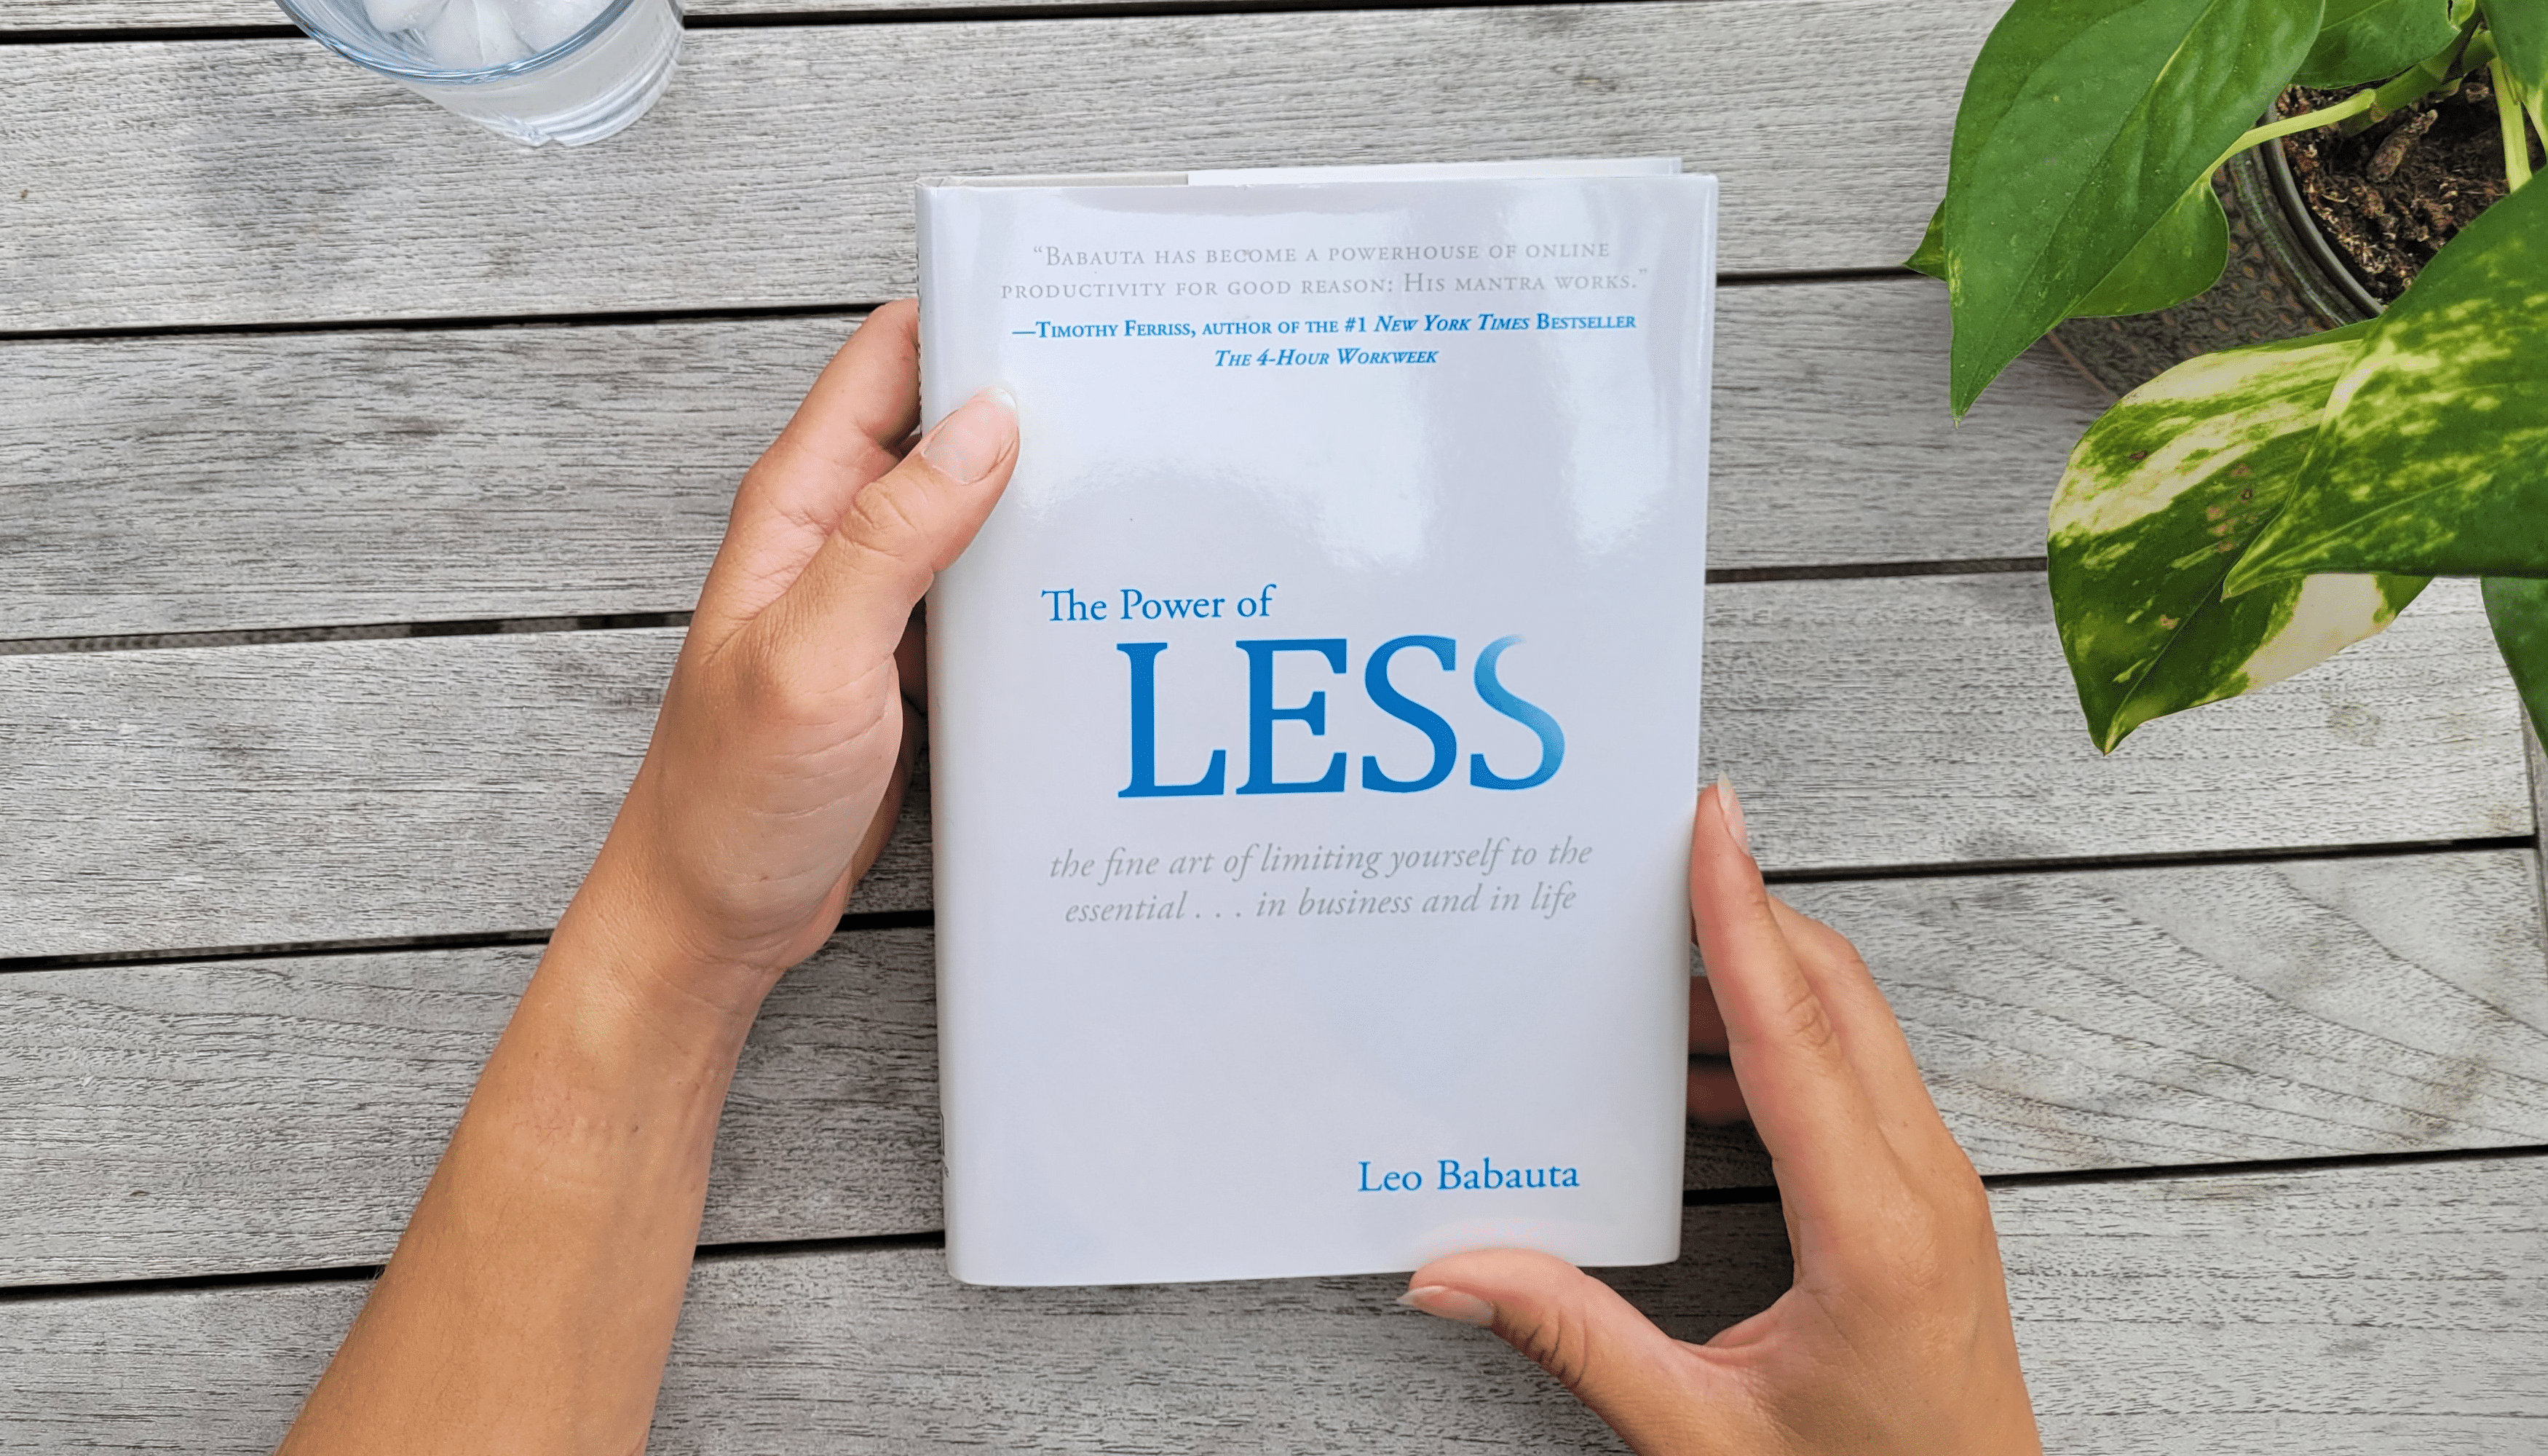 Summary – The Power of Less: The Fine Art of Limiting Yourself to the Essential by Leo Babauta